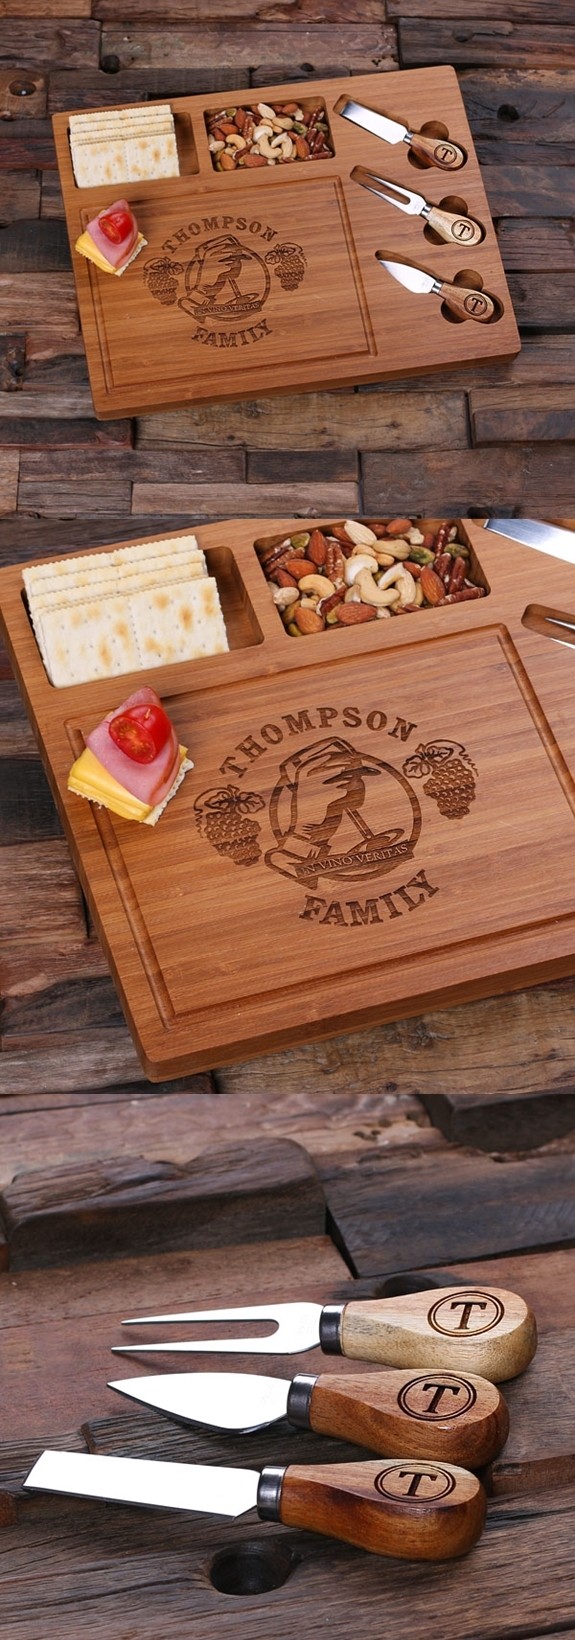 Personalized Bamboo-Wood Cutting Board/Serving Tray with Cheese Tools